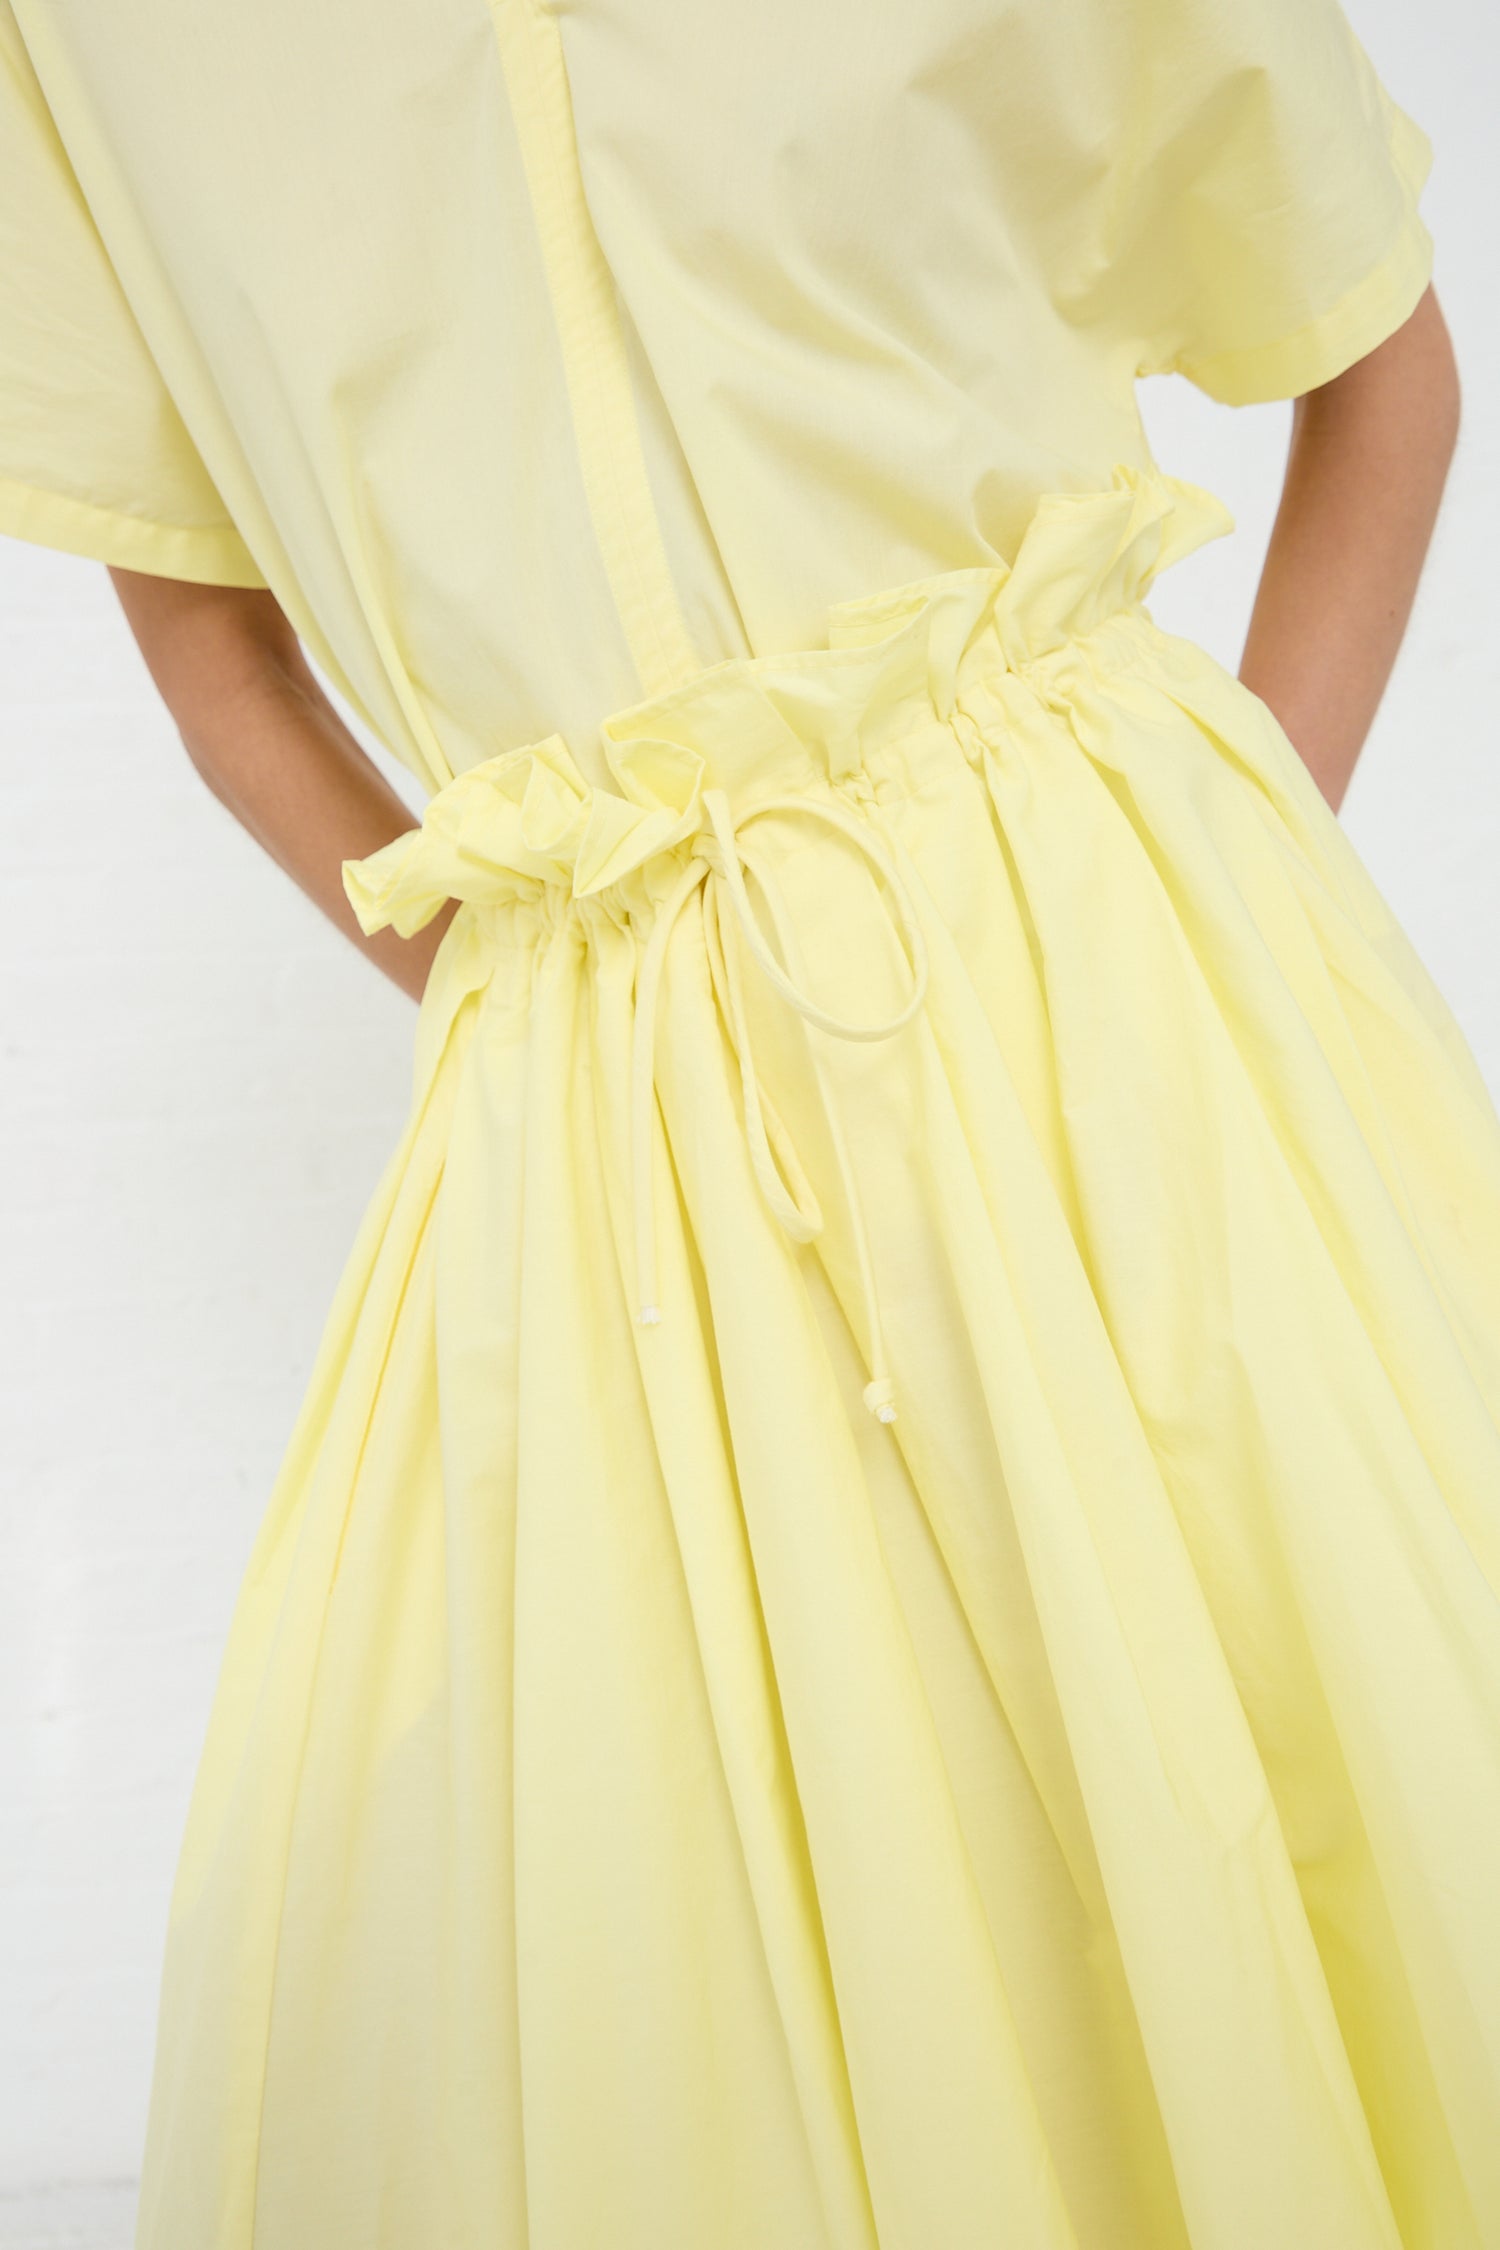 A person seen from the back wearing a Lemon Organic Cotton Parachute Skirt from Black Crane with a bow detail at the waist.